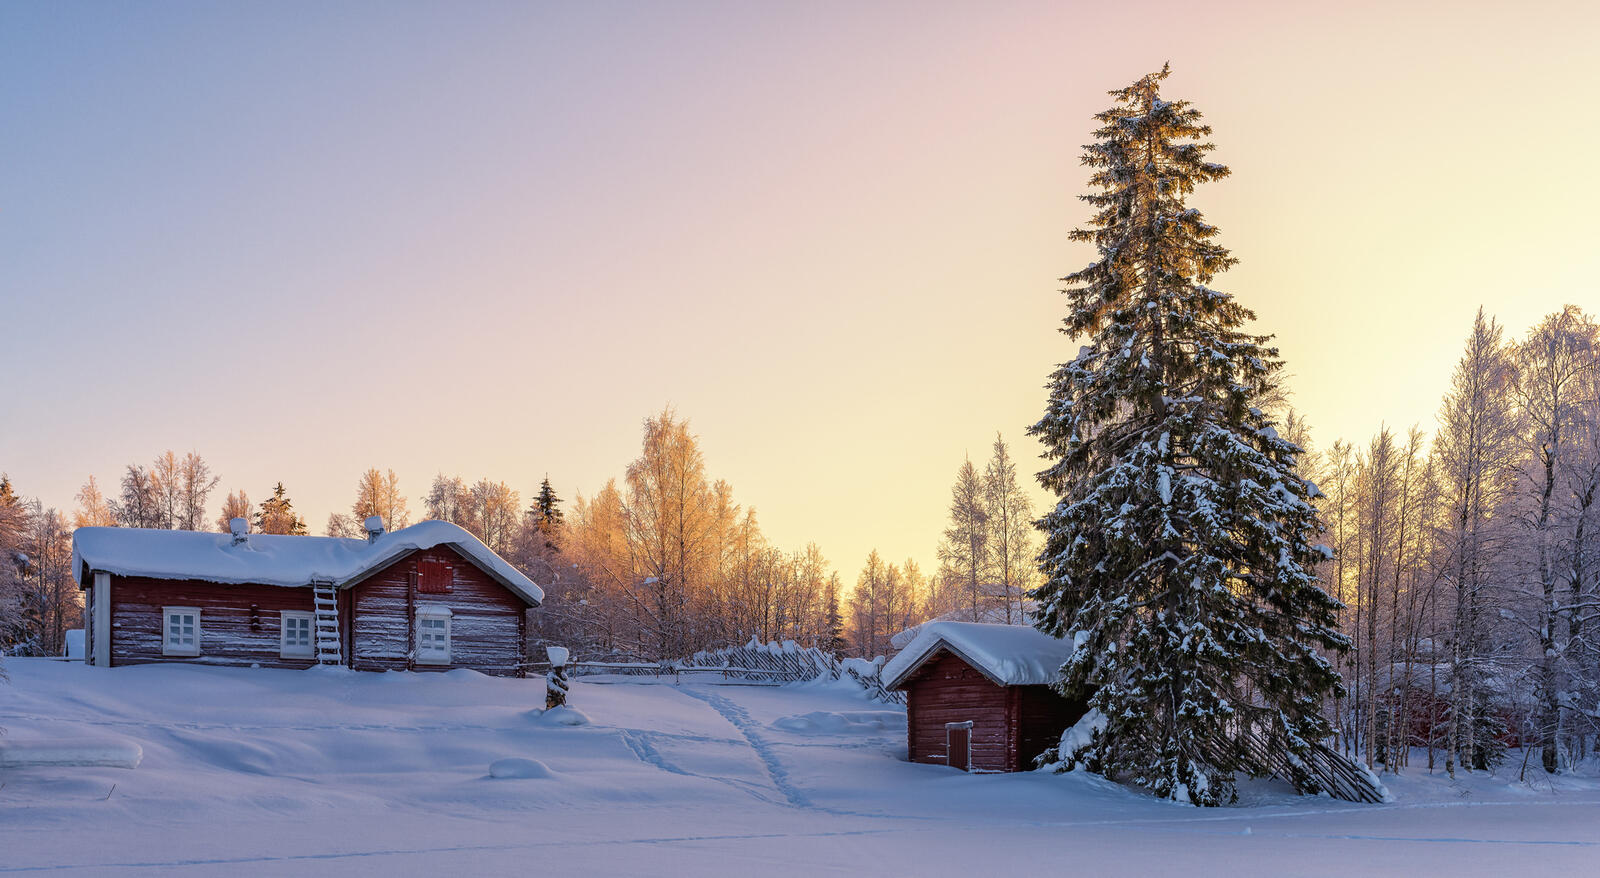 Wallpapers nature house winter on the desktop